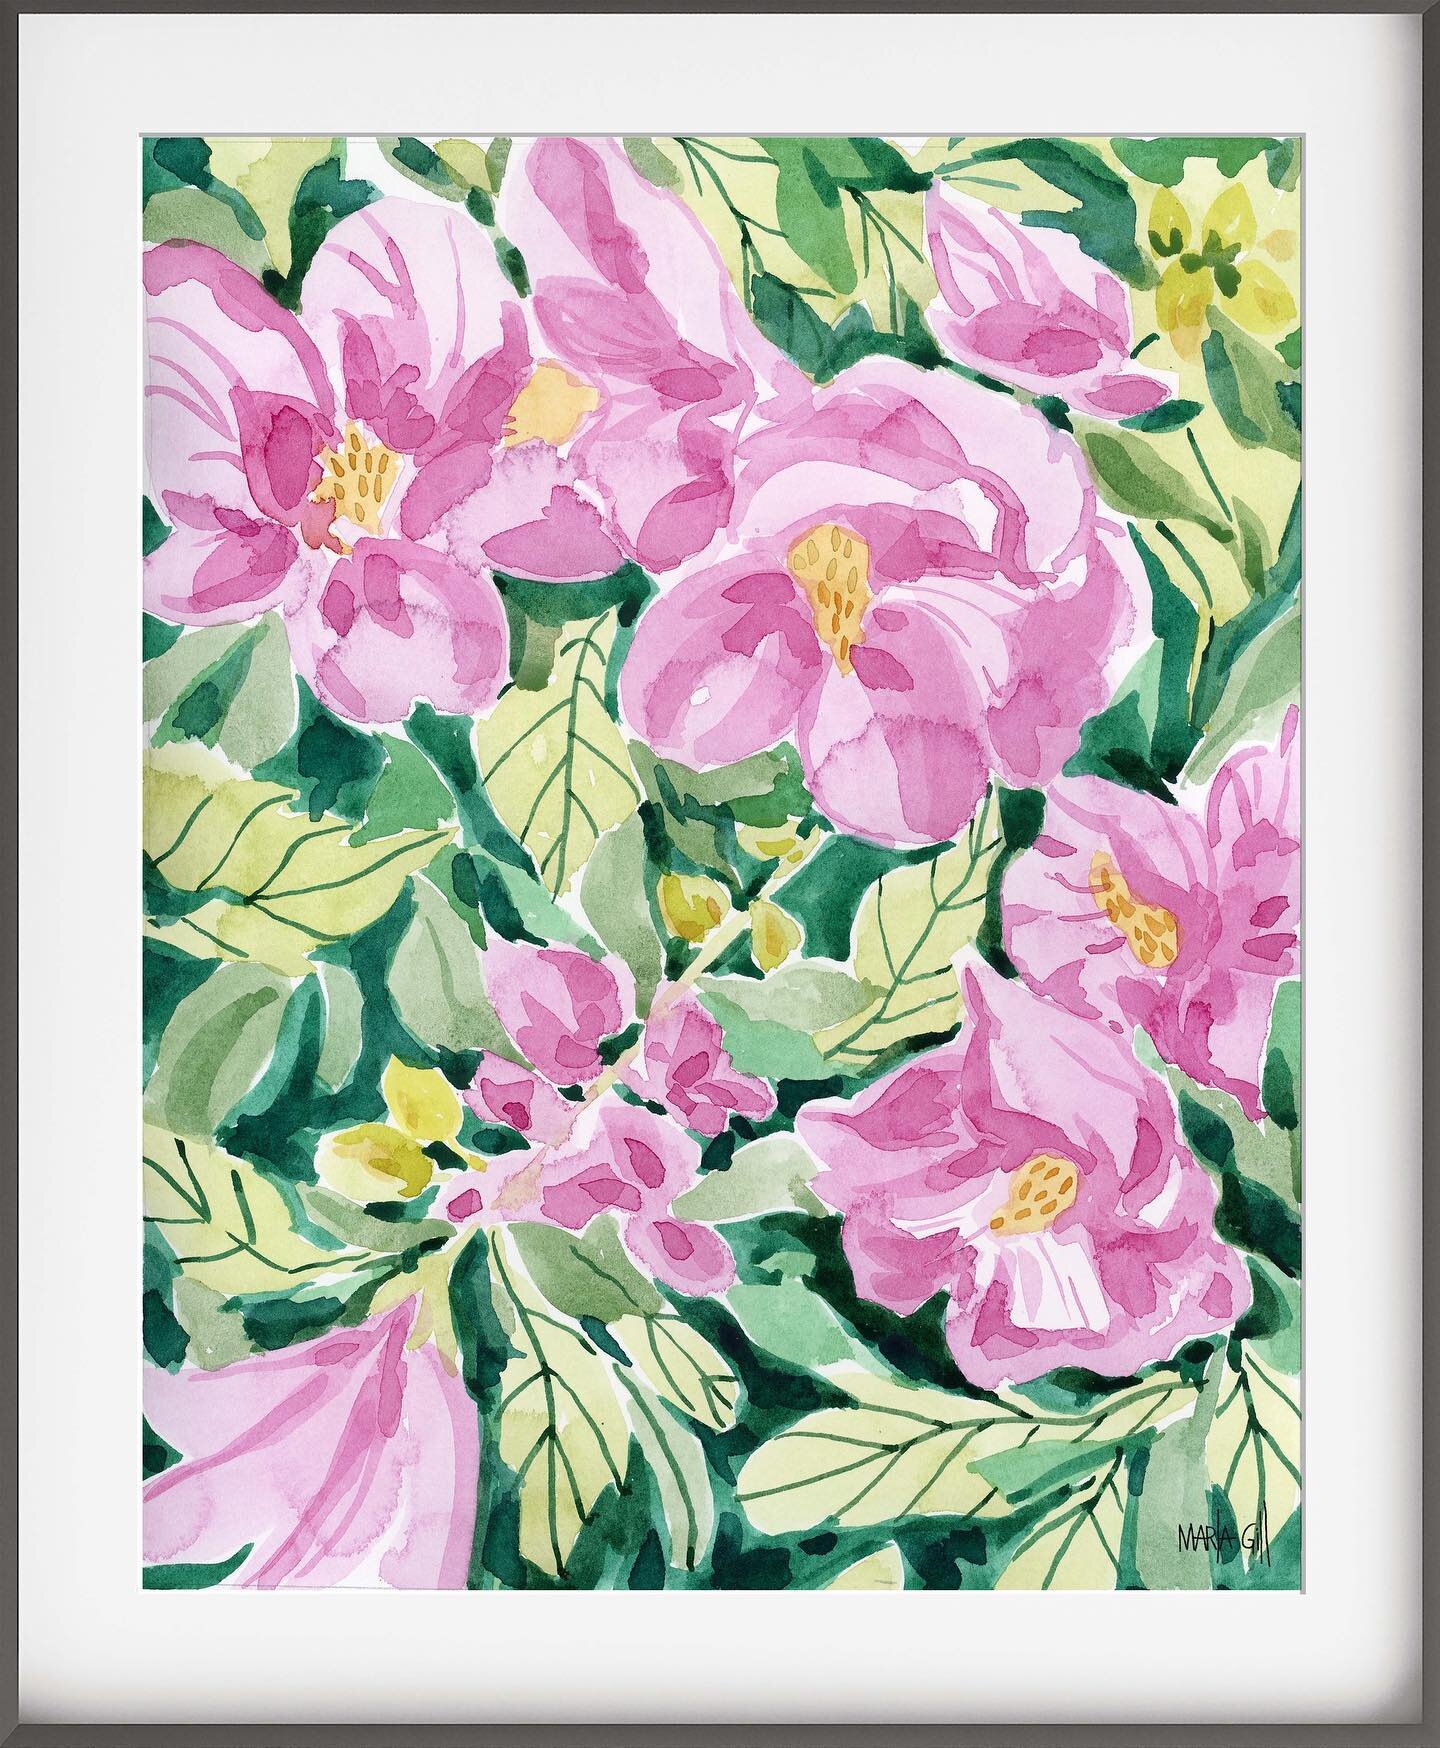 Watercolour Prints available in my Etsy shop. Link in bio. #watercolourpainting #wallart #print #art print #artprint #poster #posters #walldeco #fl #flowering #floral #floralwatercolor